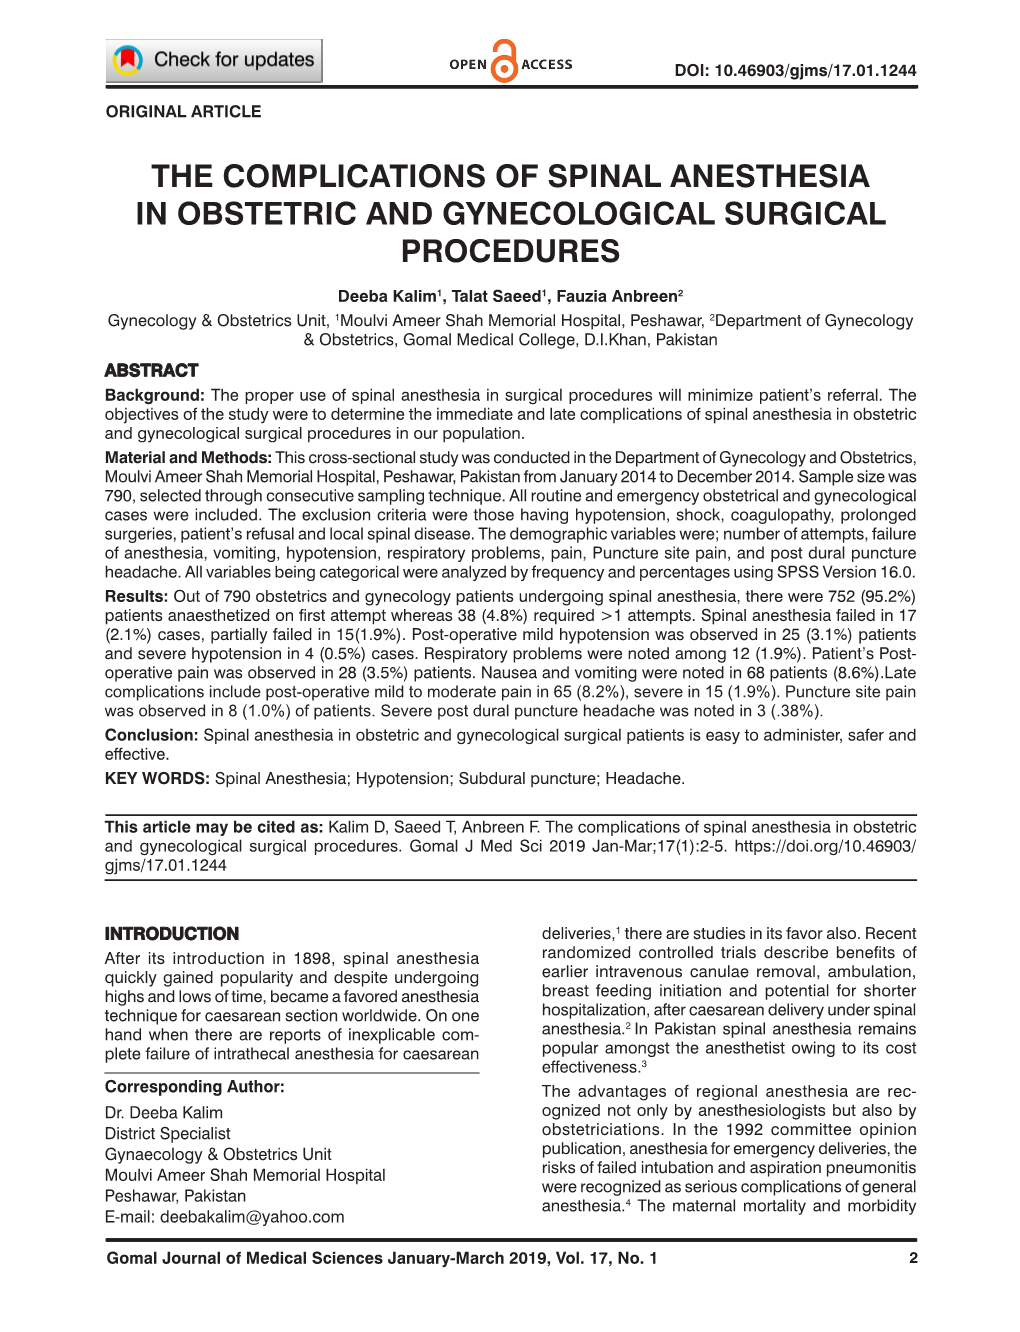 The Complications of Spinal Anesthesia in Obstetric and Gynecological Surgical Procedures